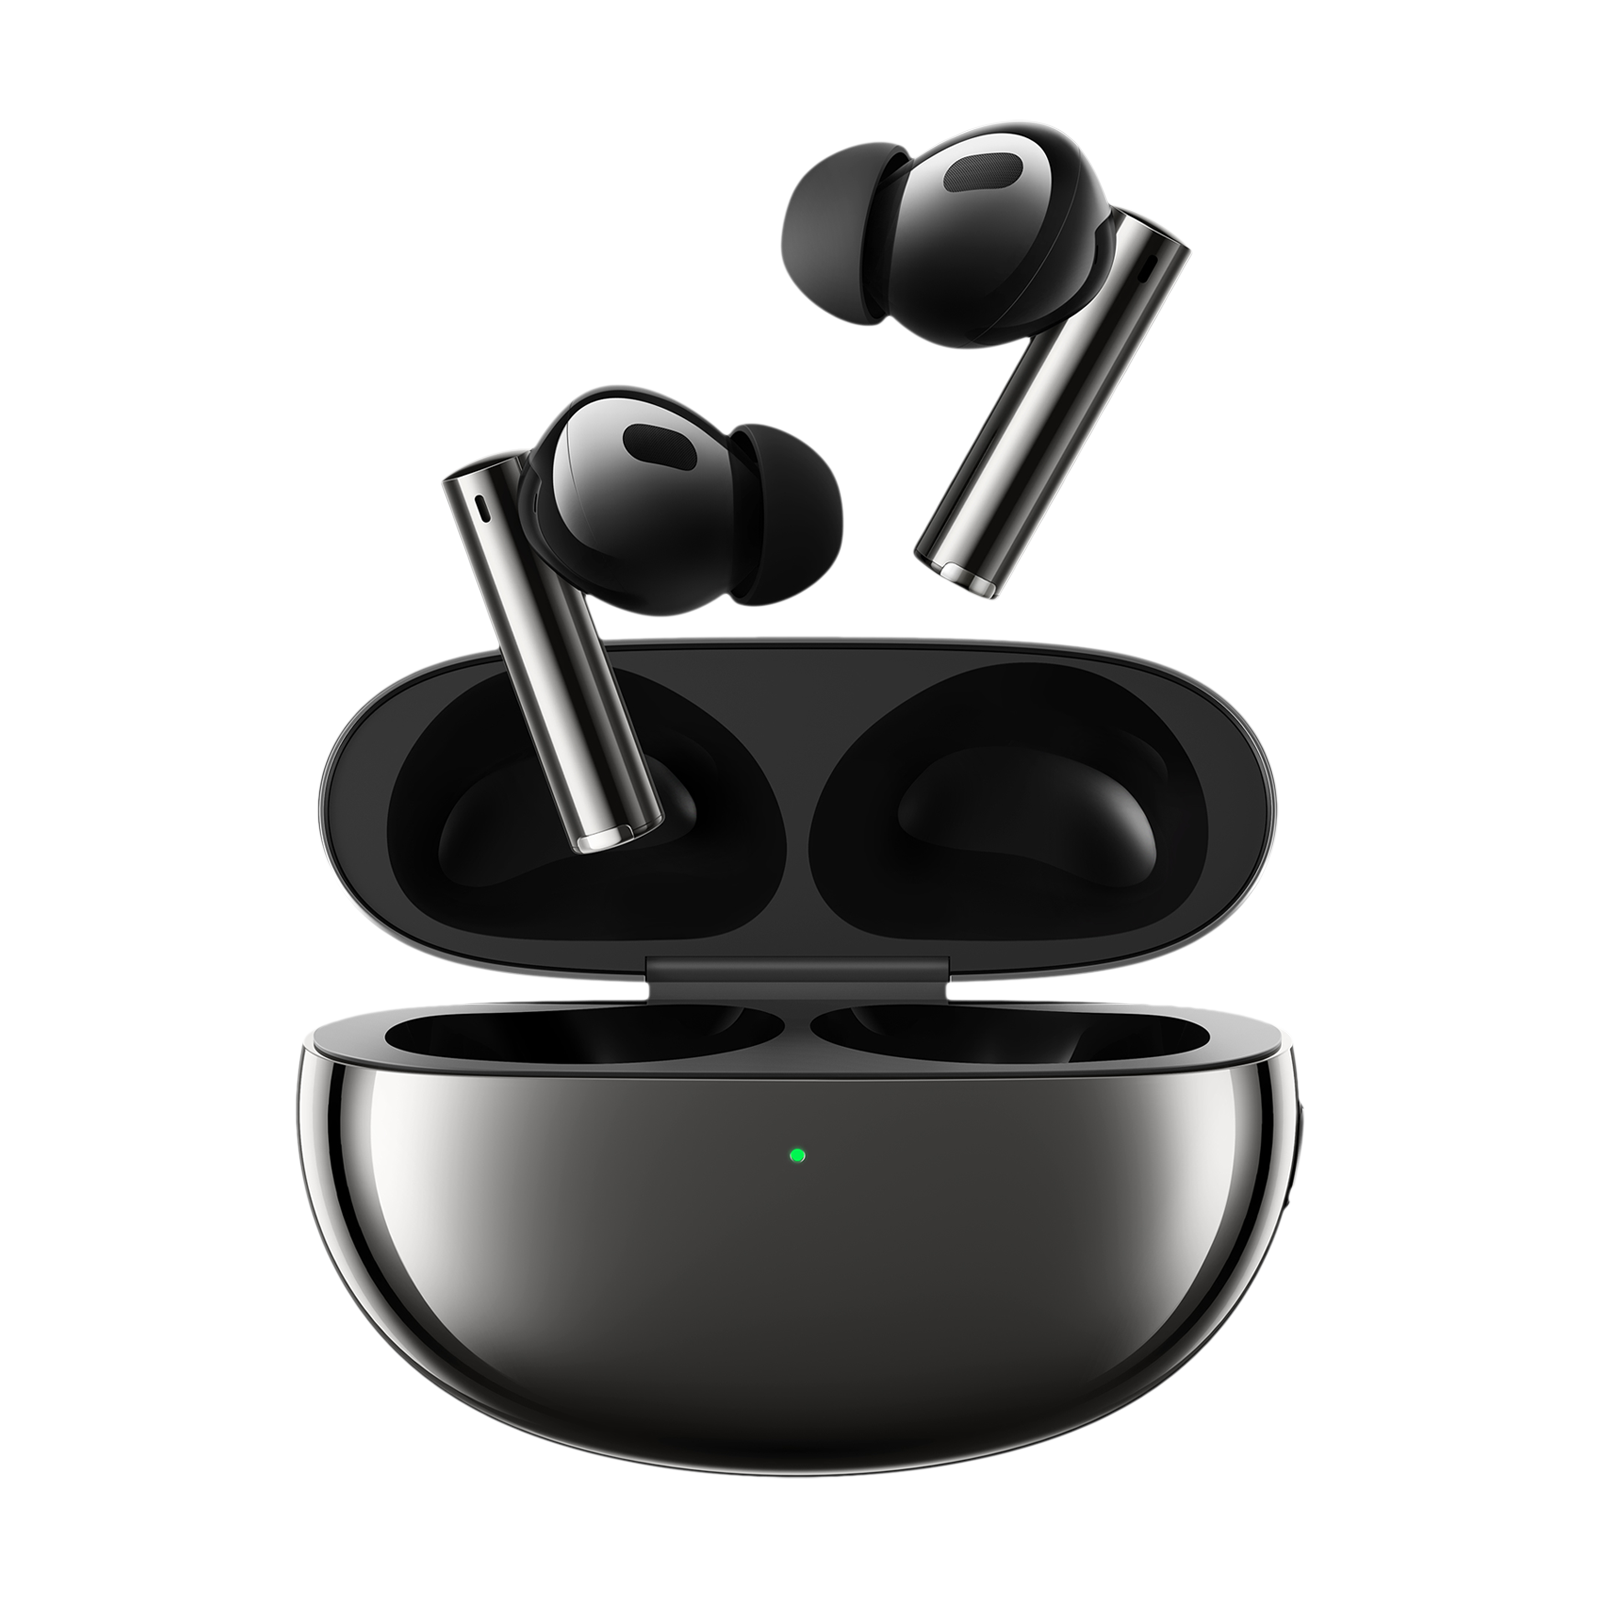 Buy realme Buds Air 5 Pro TWS Earbuds with Active Noise